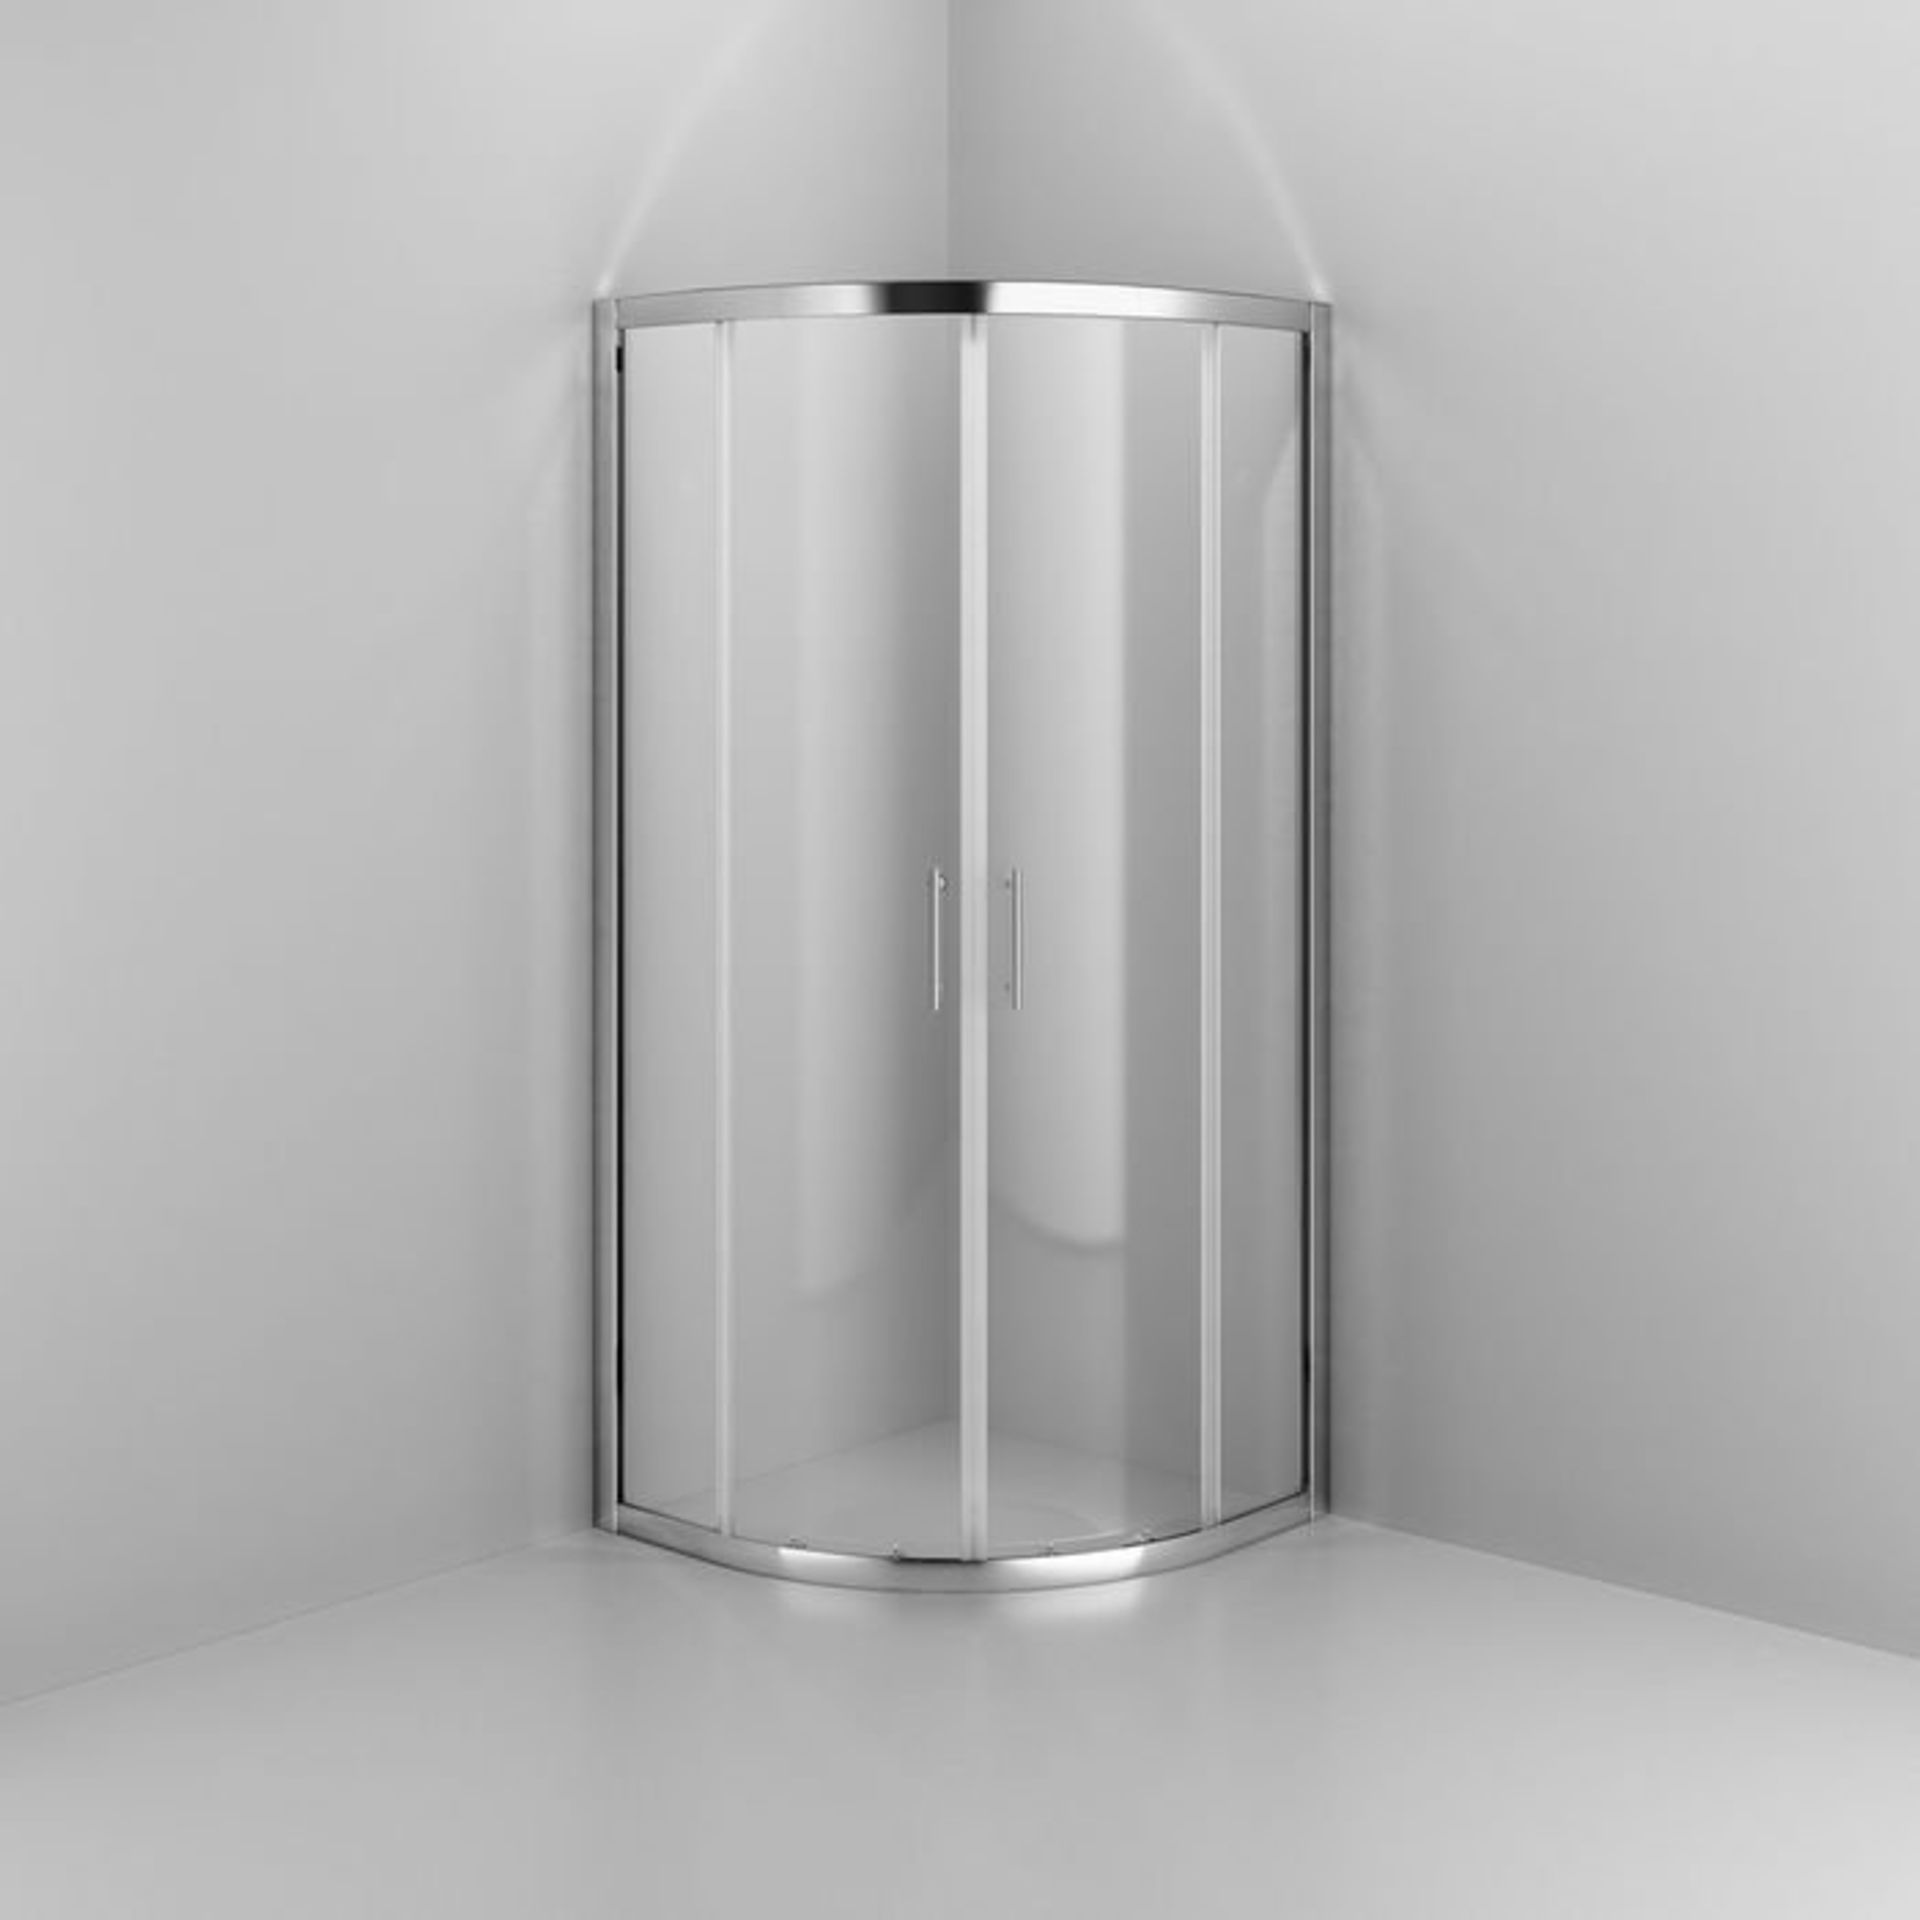 (H159) 800x800mm - 6mm - Elements Quadrant Shower Enclosure. RRP £272.99. 6mm Safety Glass Fully - Image 5 of 8